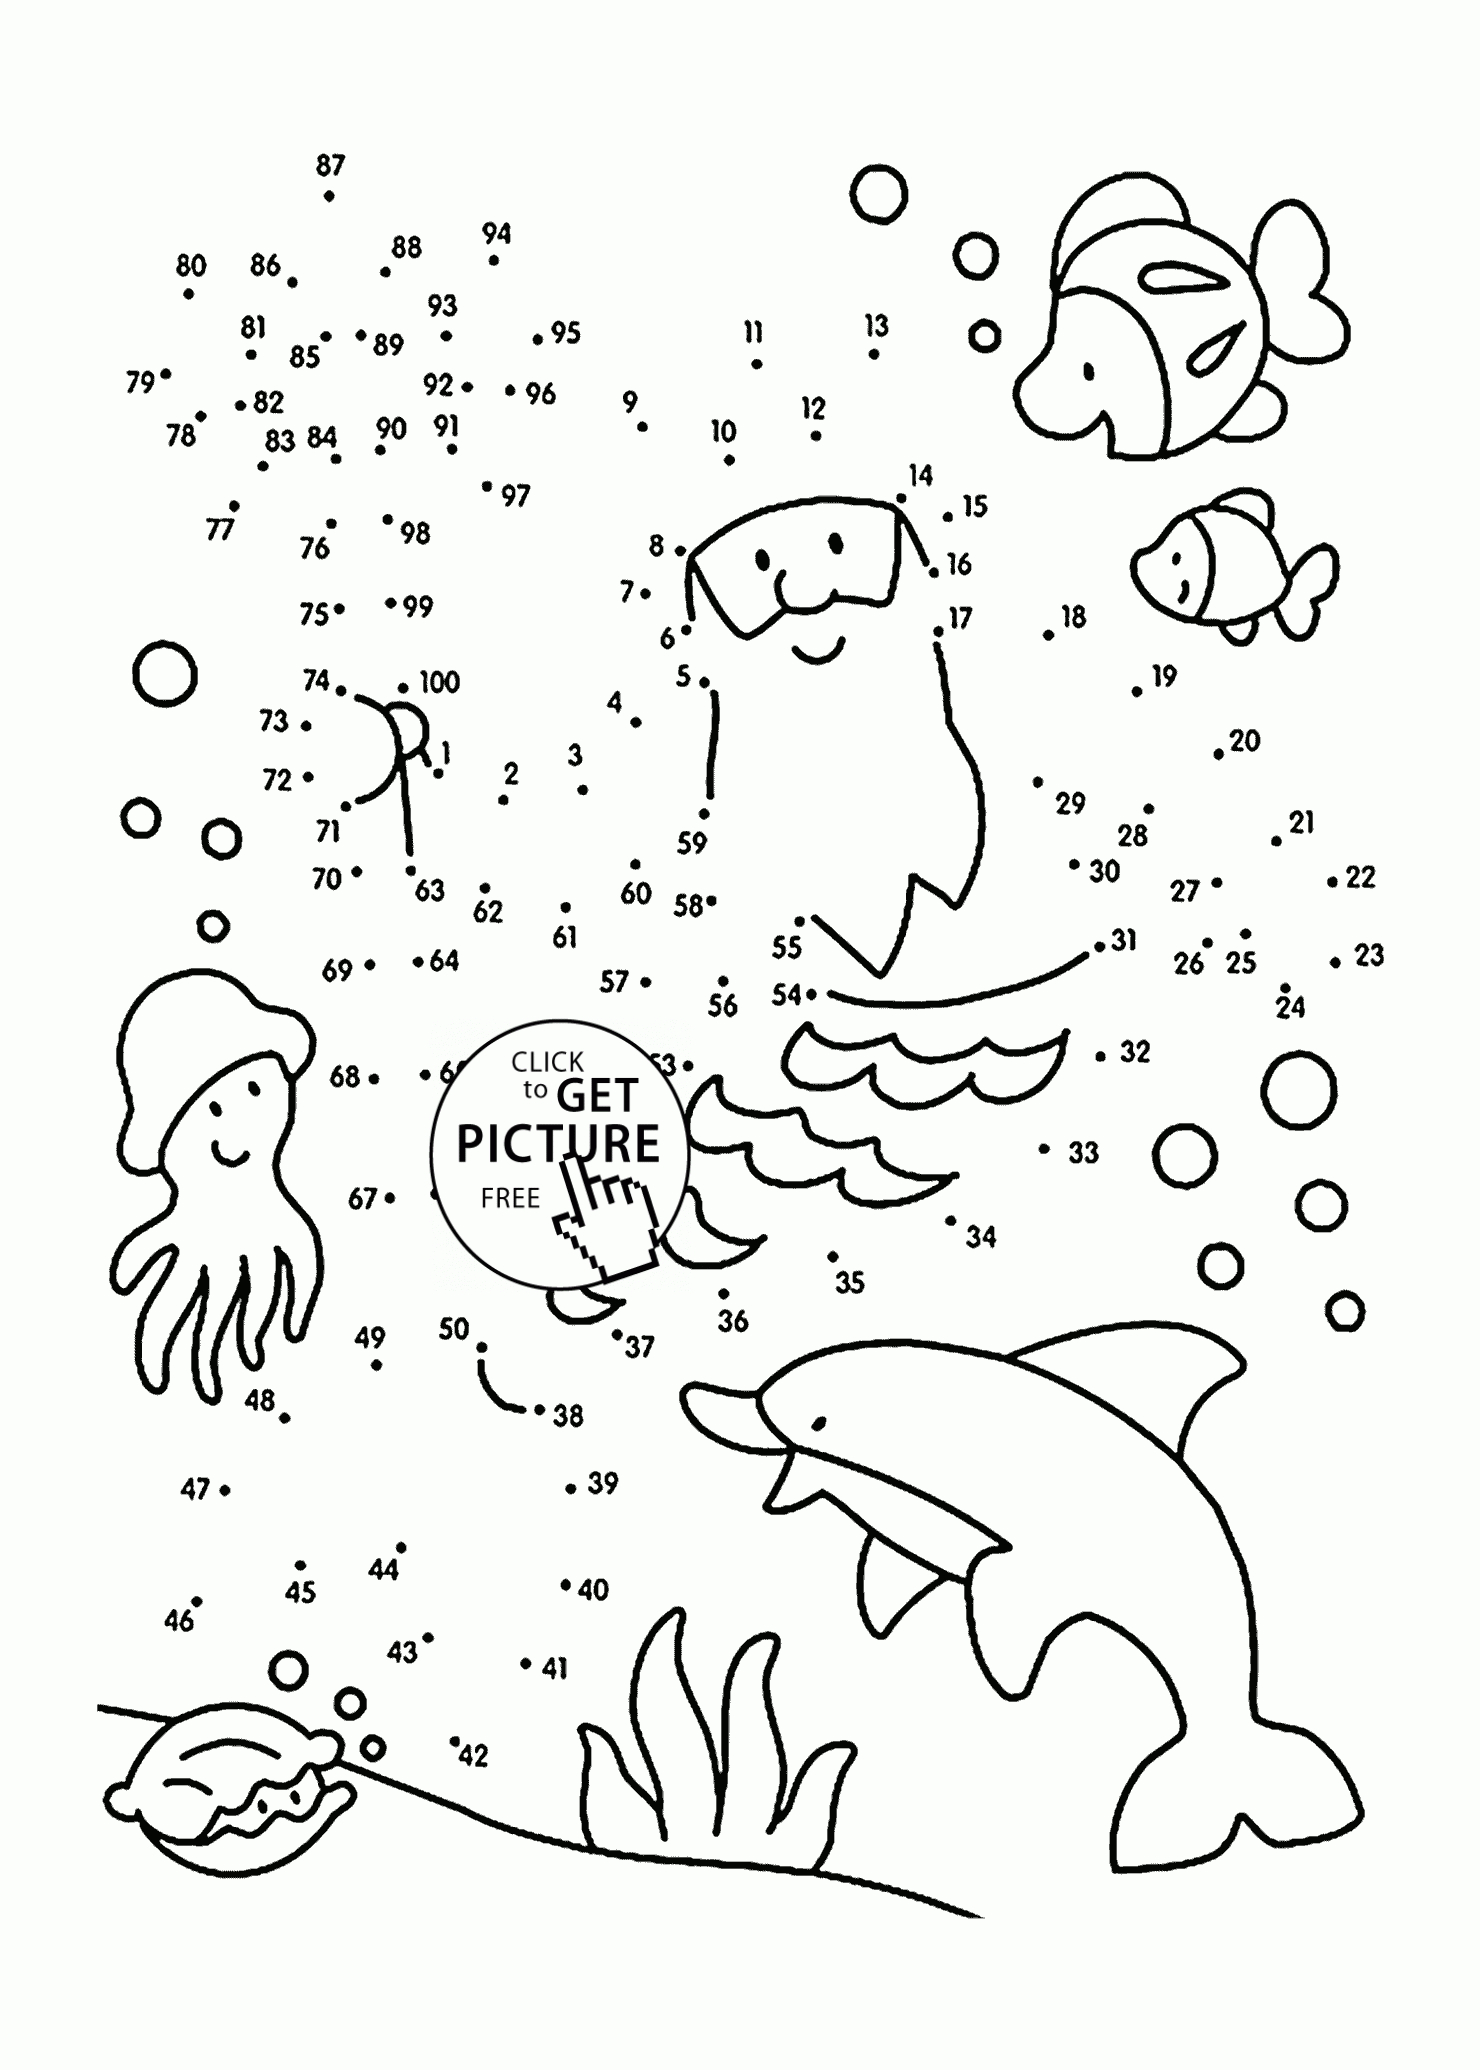 Undersea Dot To Dot Coloring Pages For Kids, Connect The Dots - Free Dot To Dot Printables